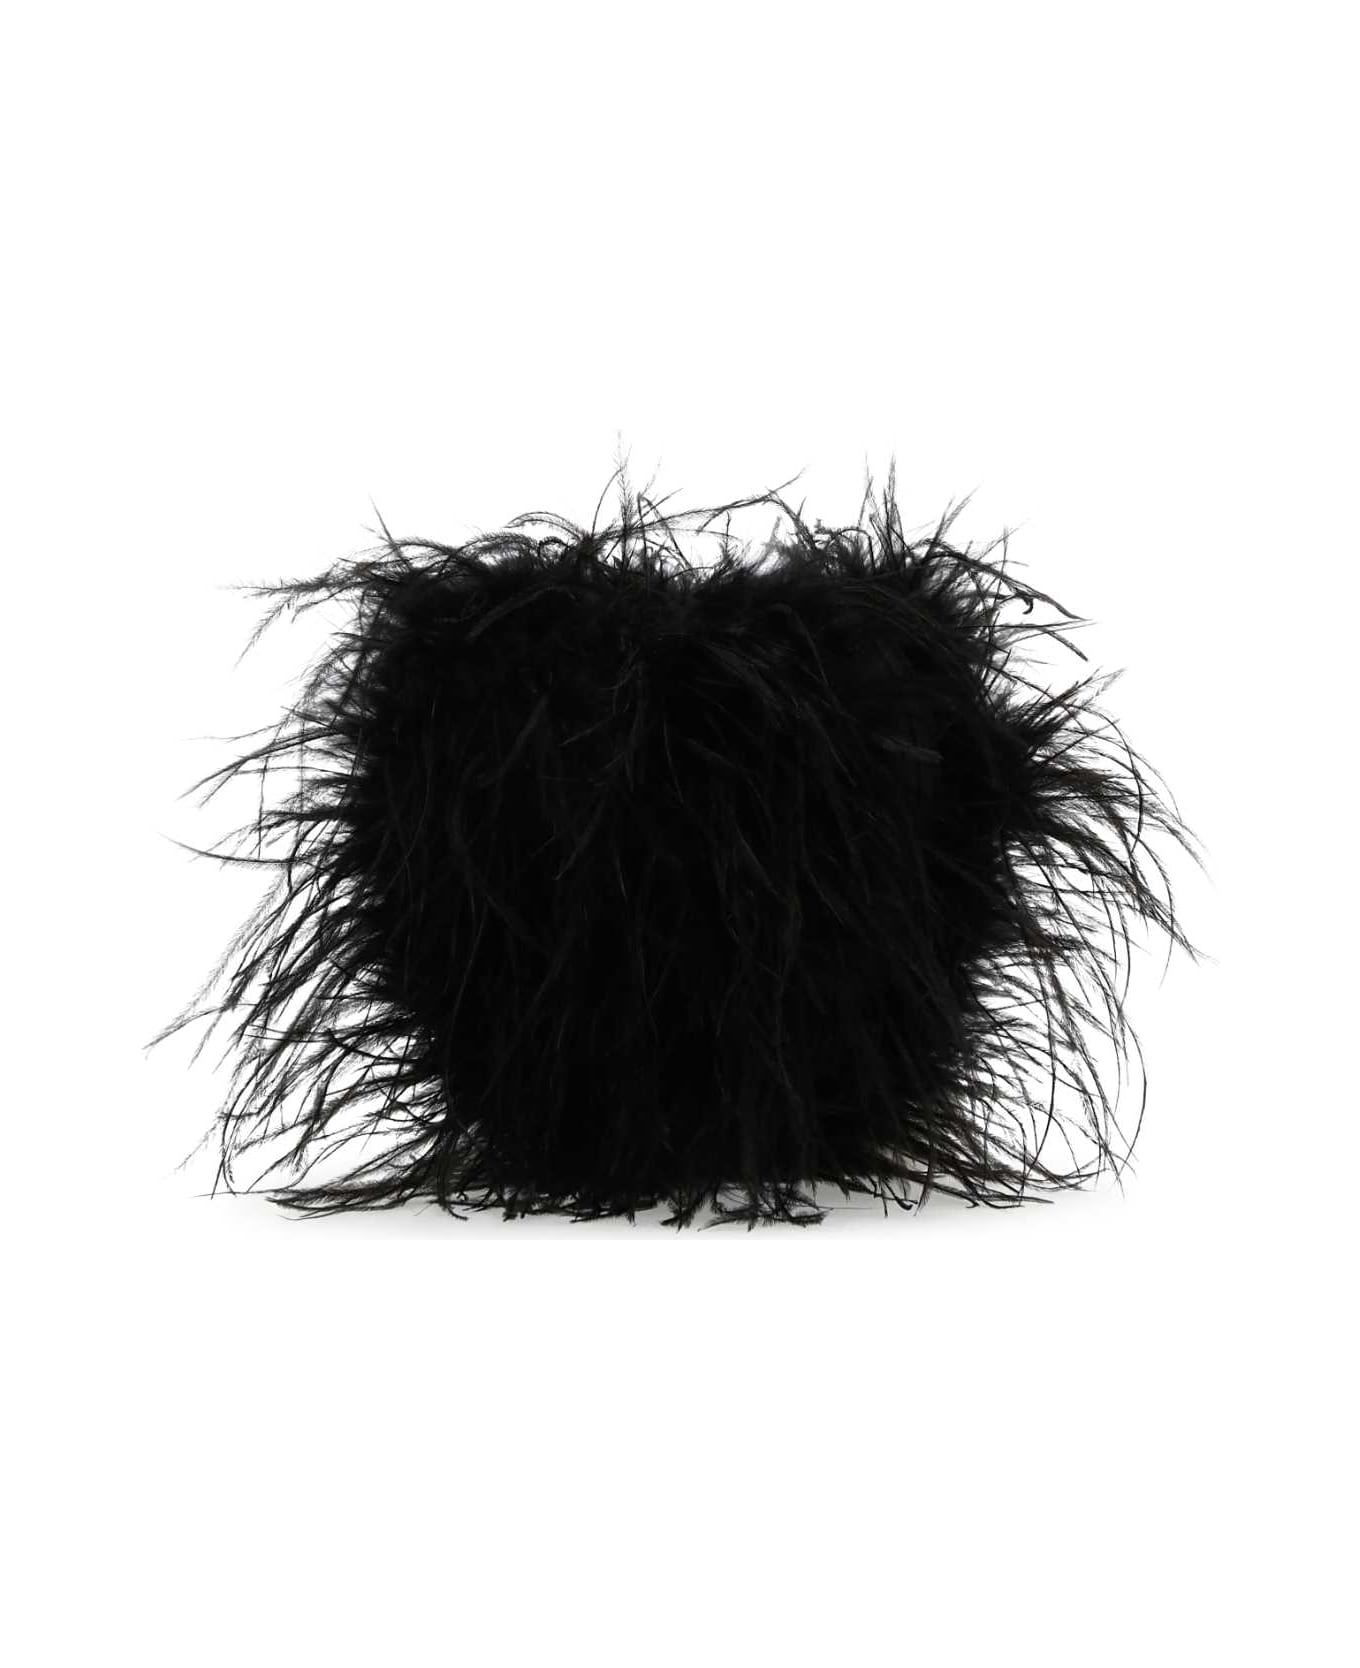 Alexander Wang Black Feathers Clutch - 001 クラッチバッグ